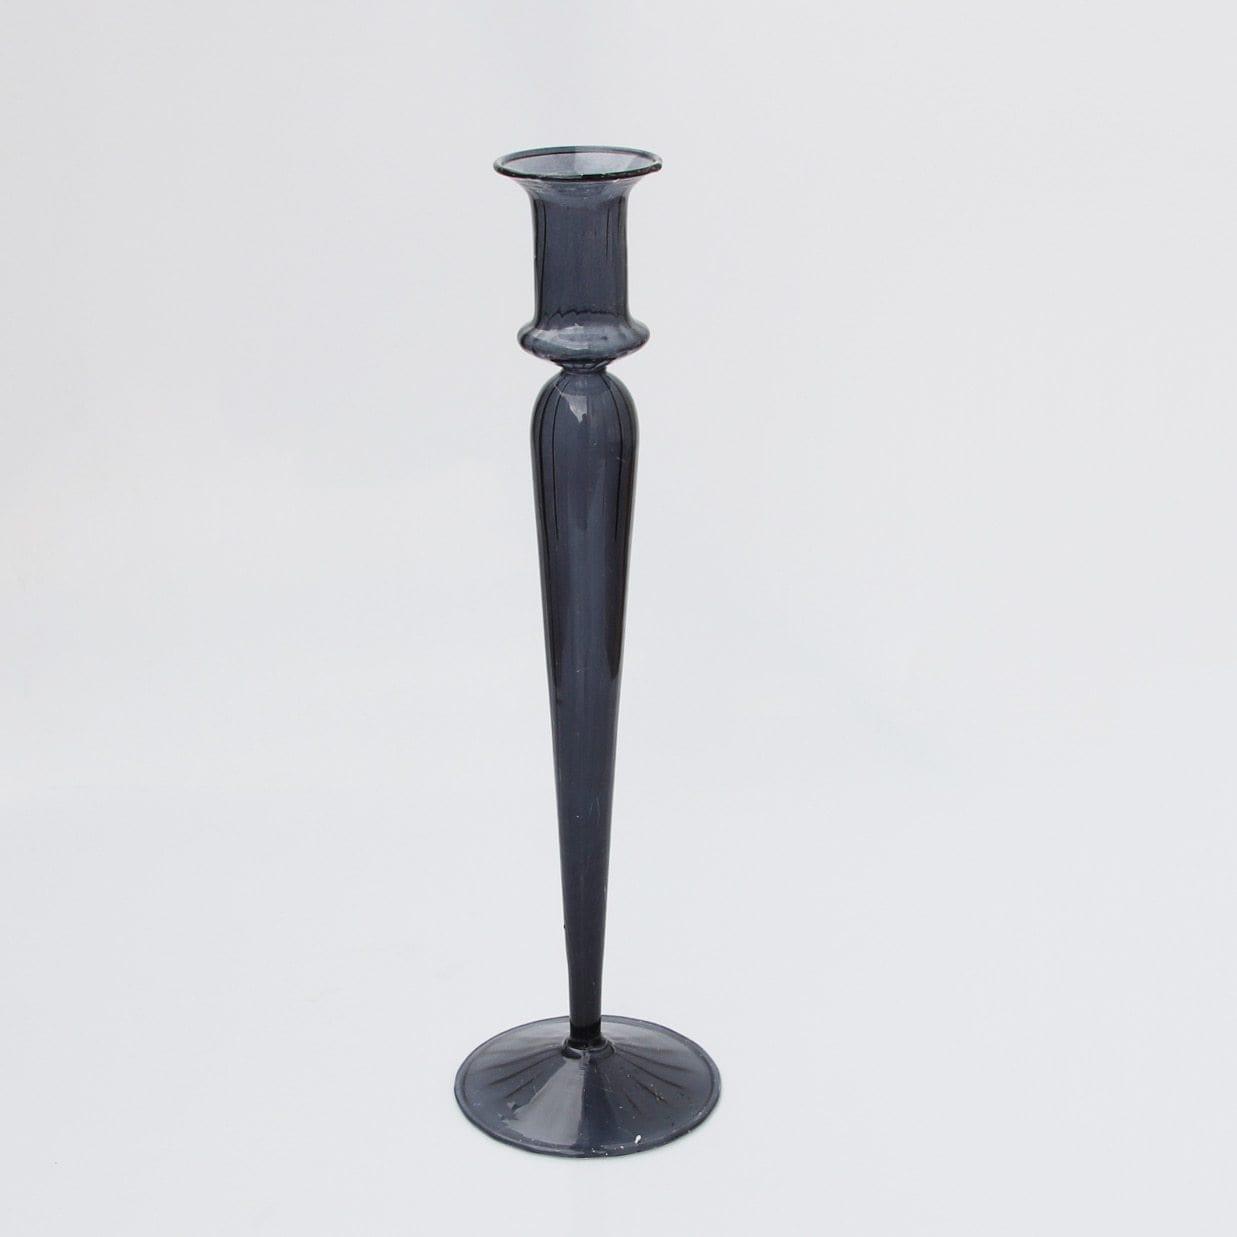 Shop 0 Black Glass Candle Holder For Wedding Decorations Candlestick Romantic Candelabros Nordic Candle Stand Candle Holders Glass Mademoiselle Home Decor